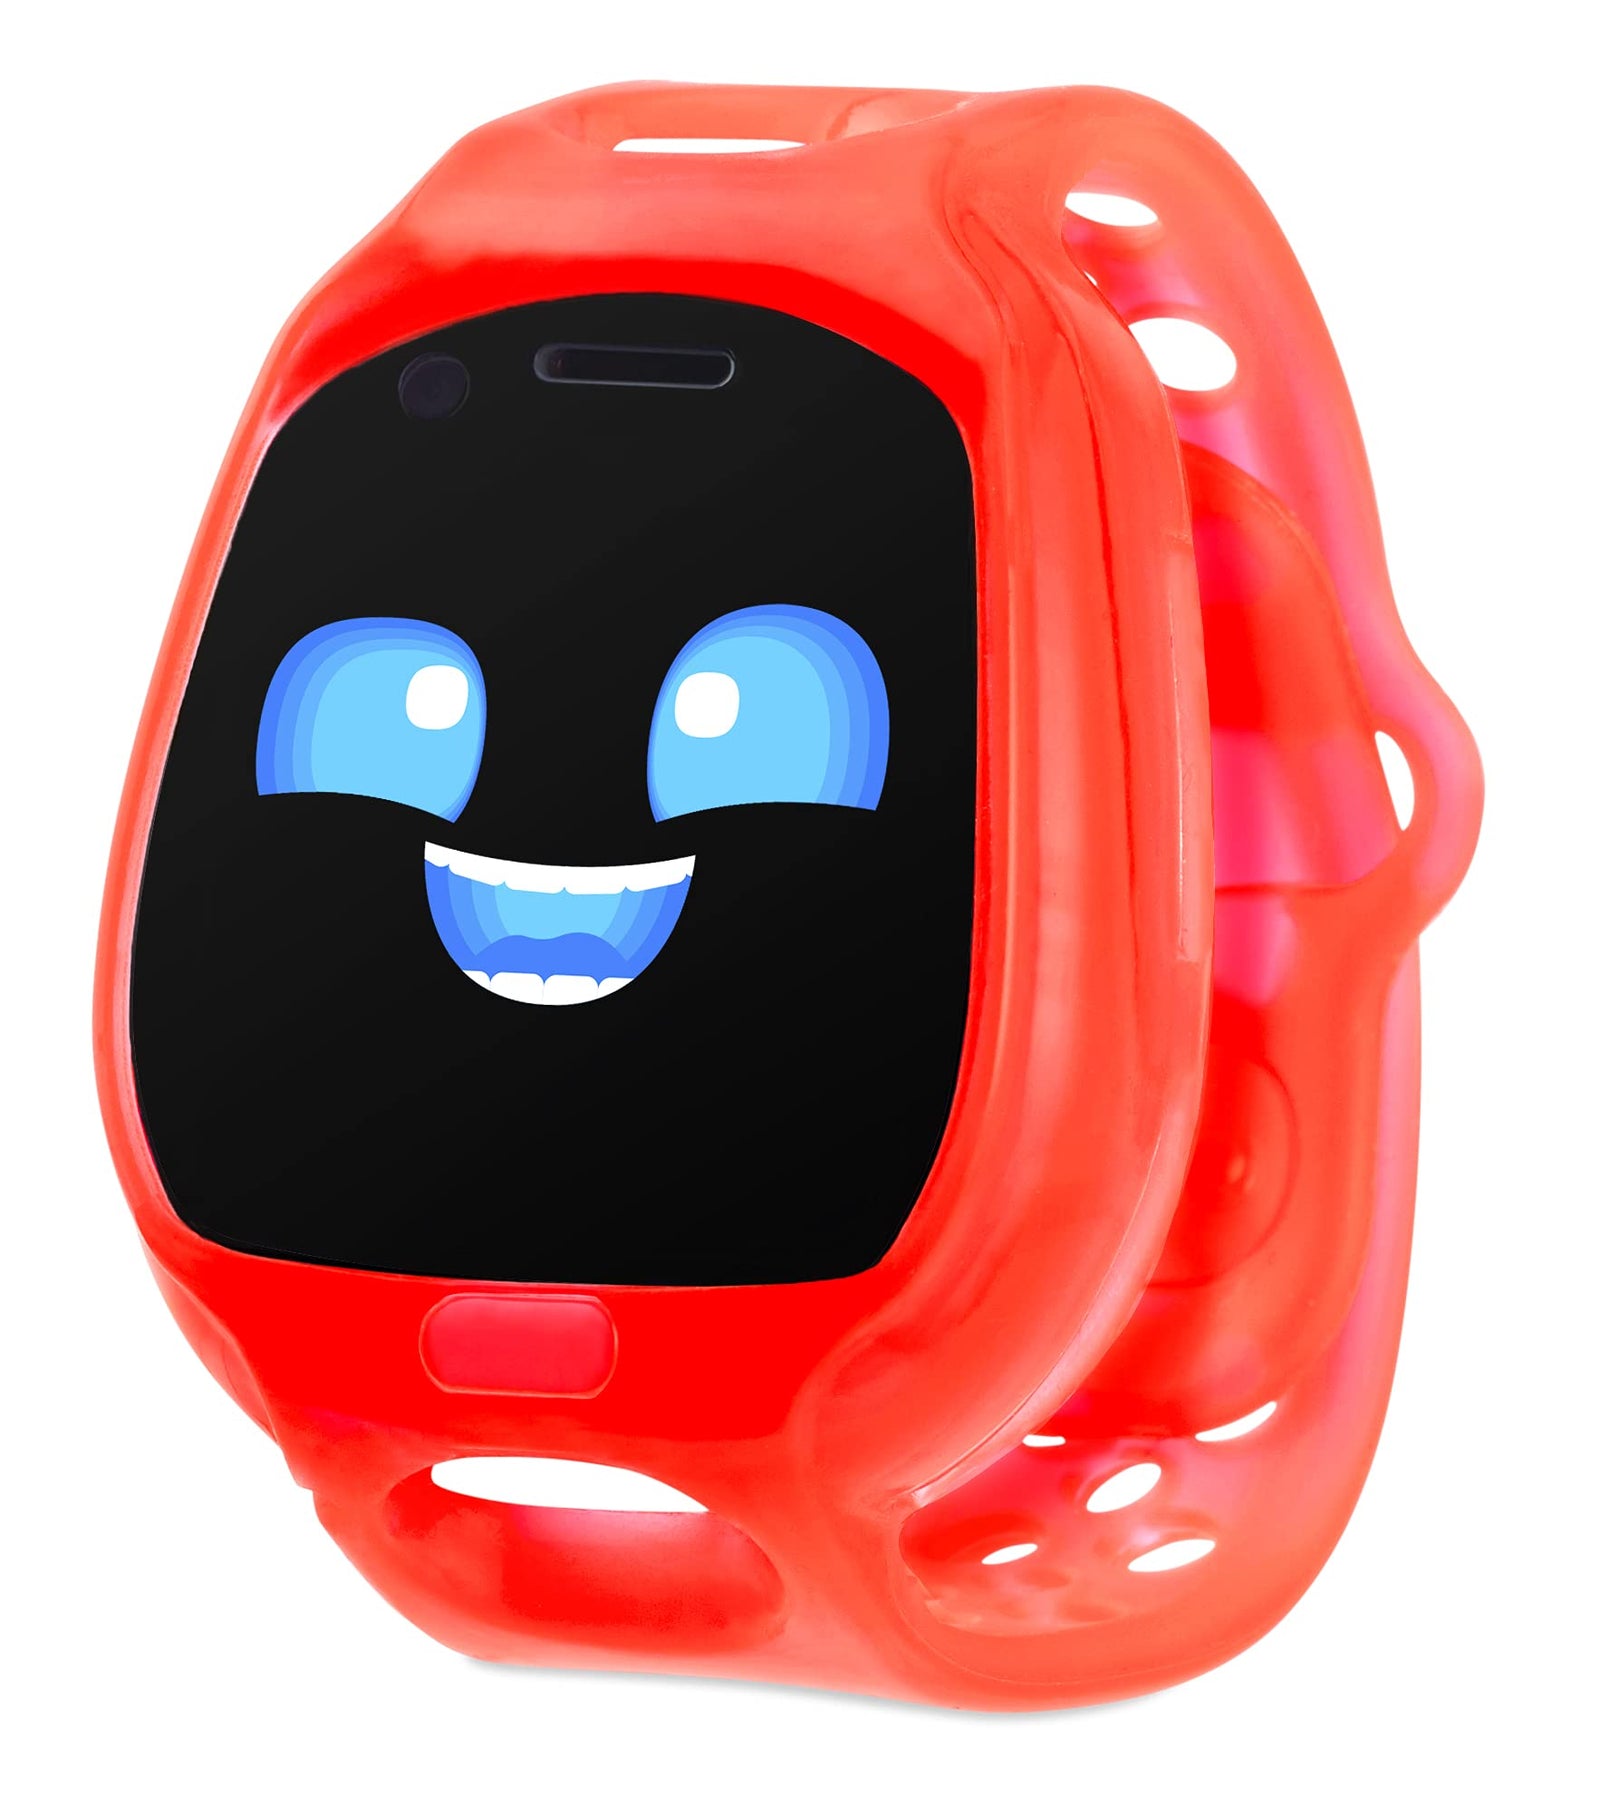 Little Tikes Tobi 2 Robot Red Smartwatch with Head-to-Head Gaming, Advanced Graphics, Motion-Activated Selfie Camera, Fun Expressions, Games, Pedometer, Splashproof, Wireless Connectivity, Video | 6+